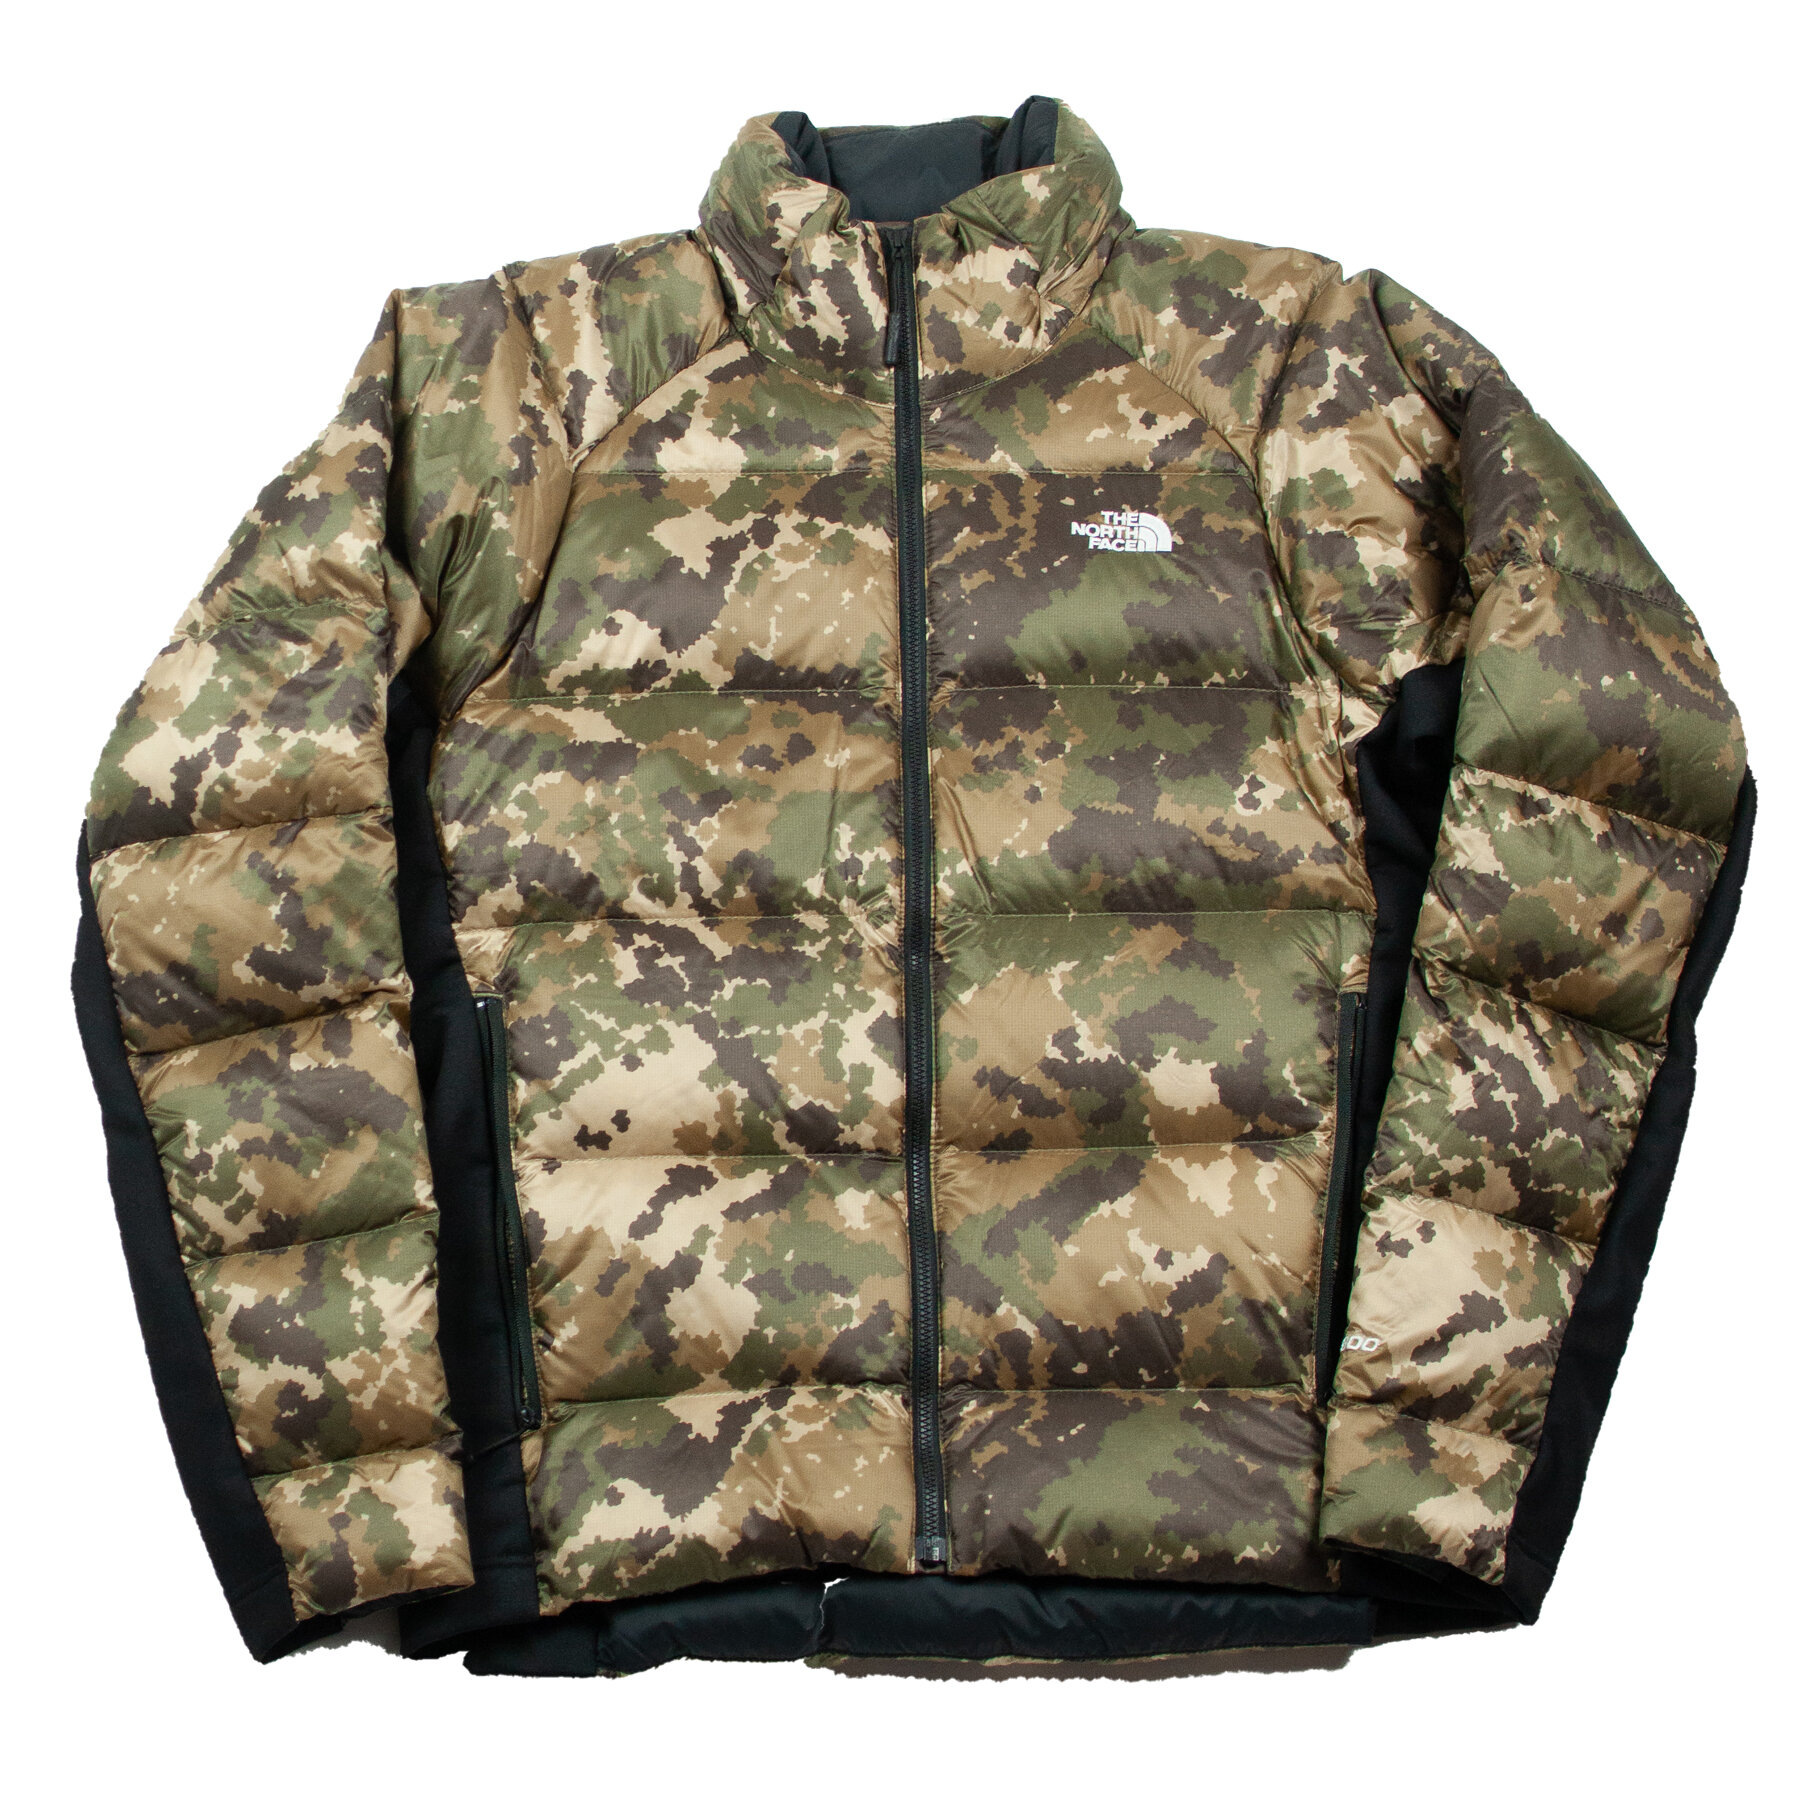 camouflage north face